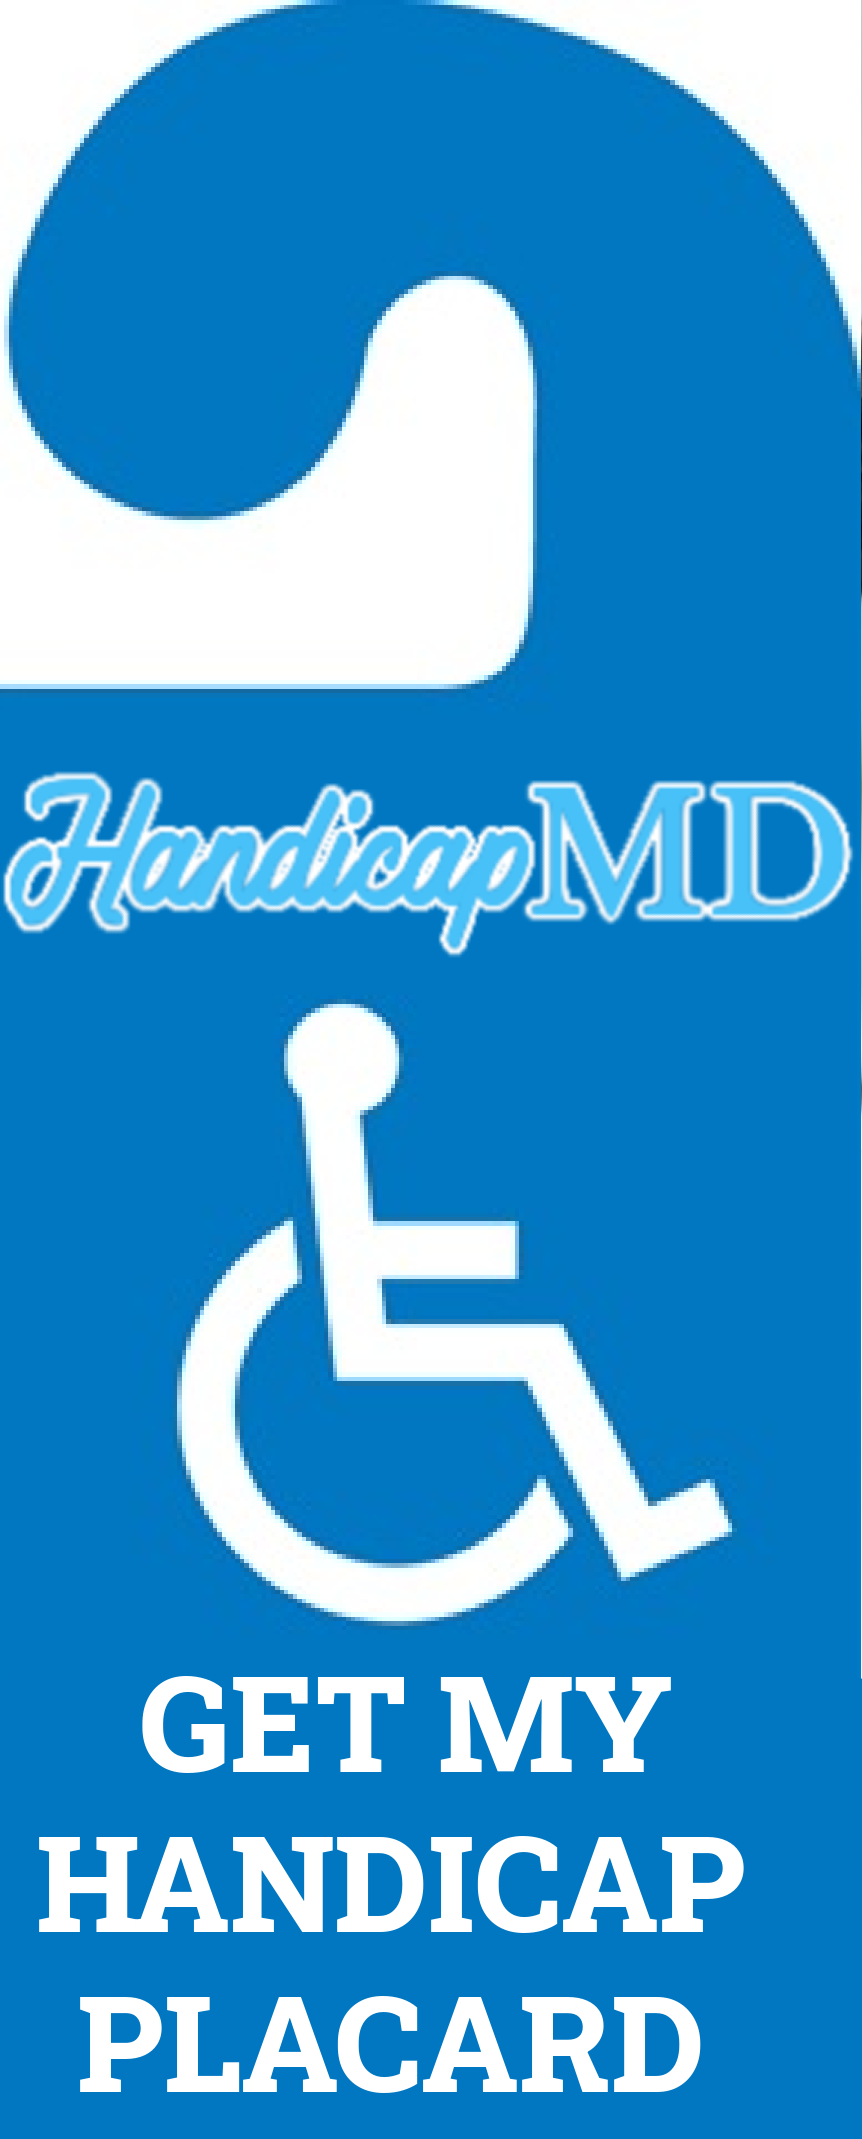 How to Replace a Lost or Stolen Handicap Placard in New Mexico